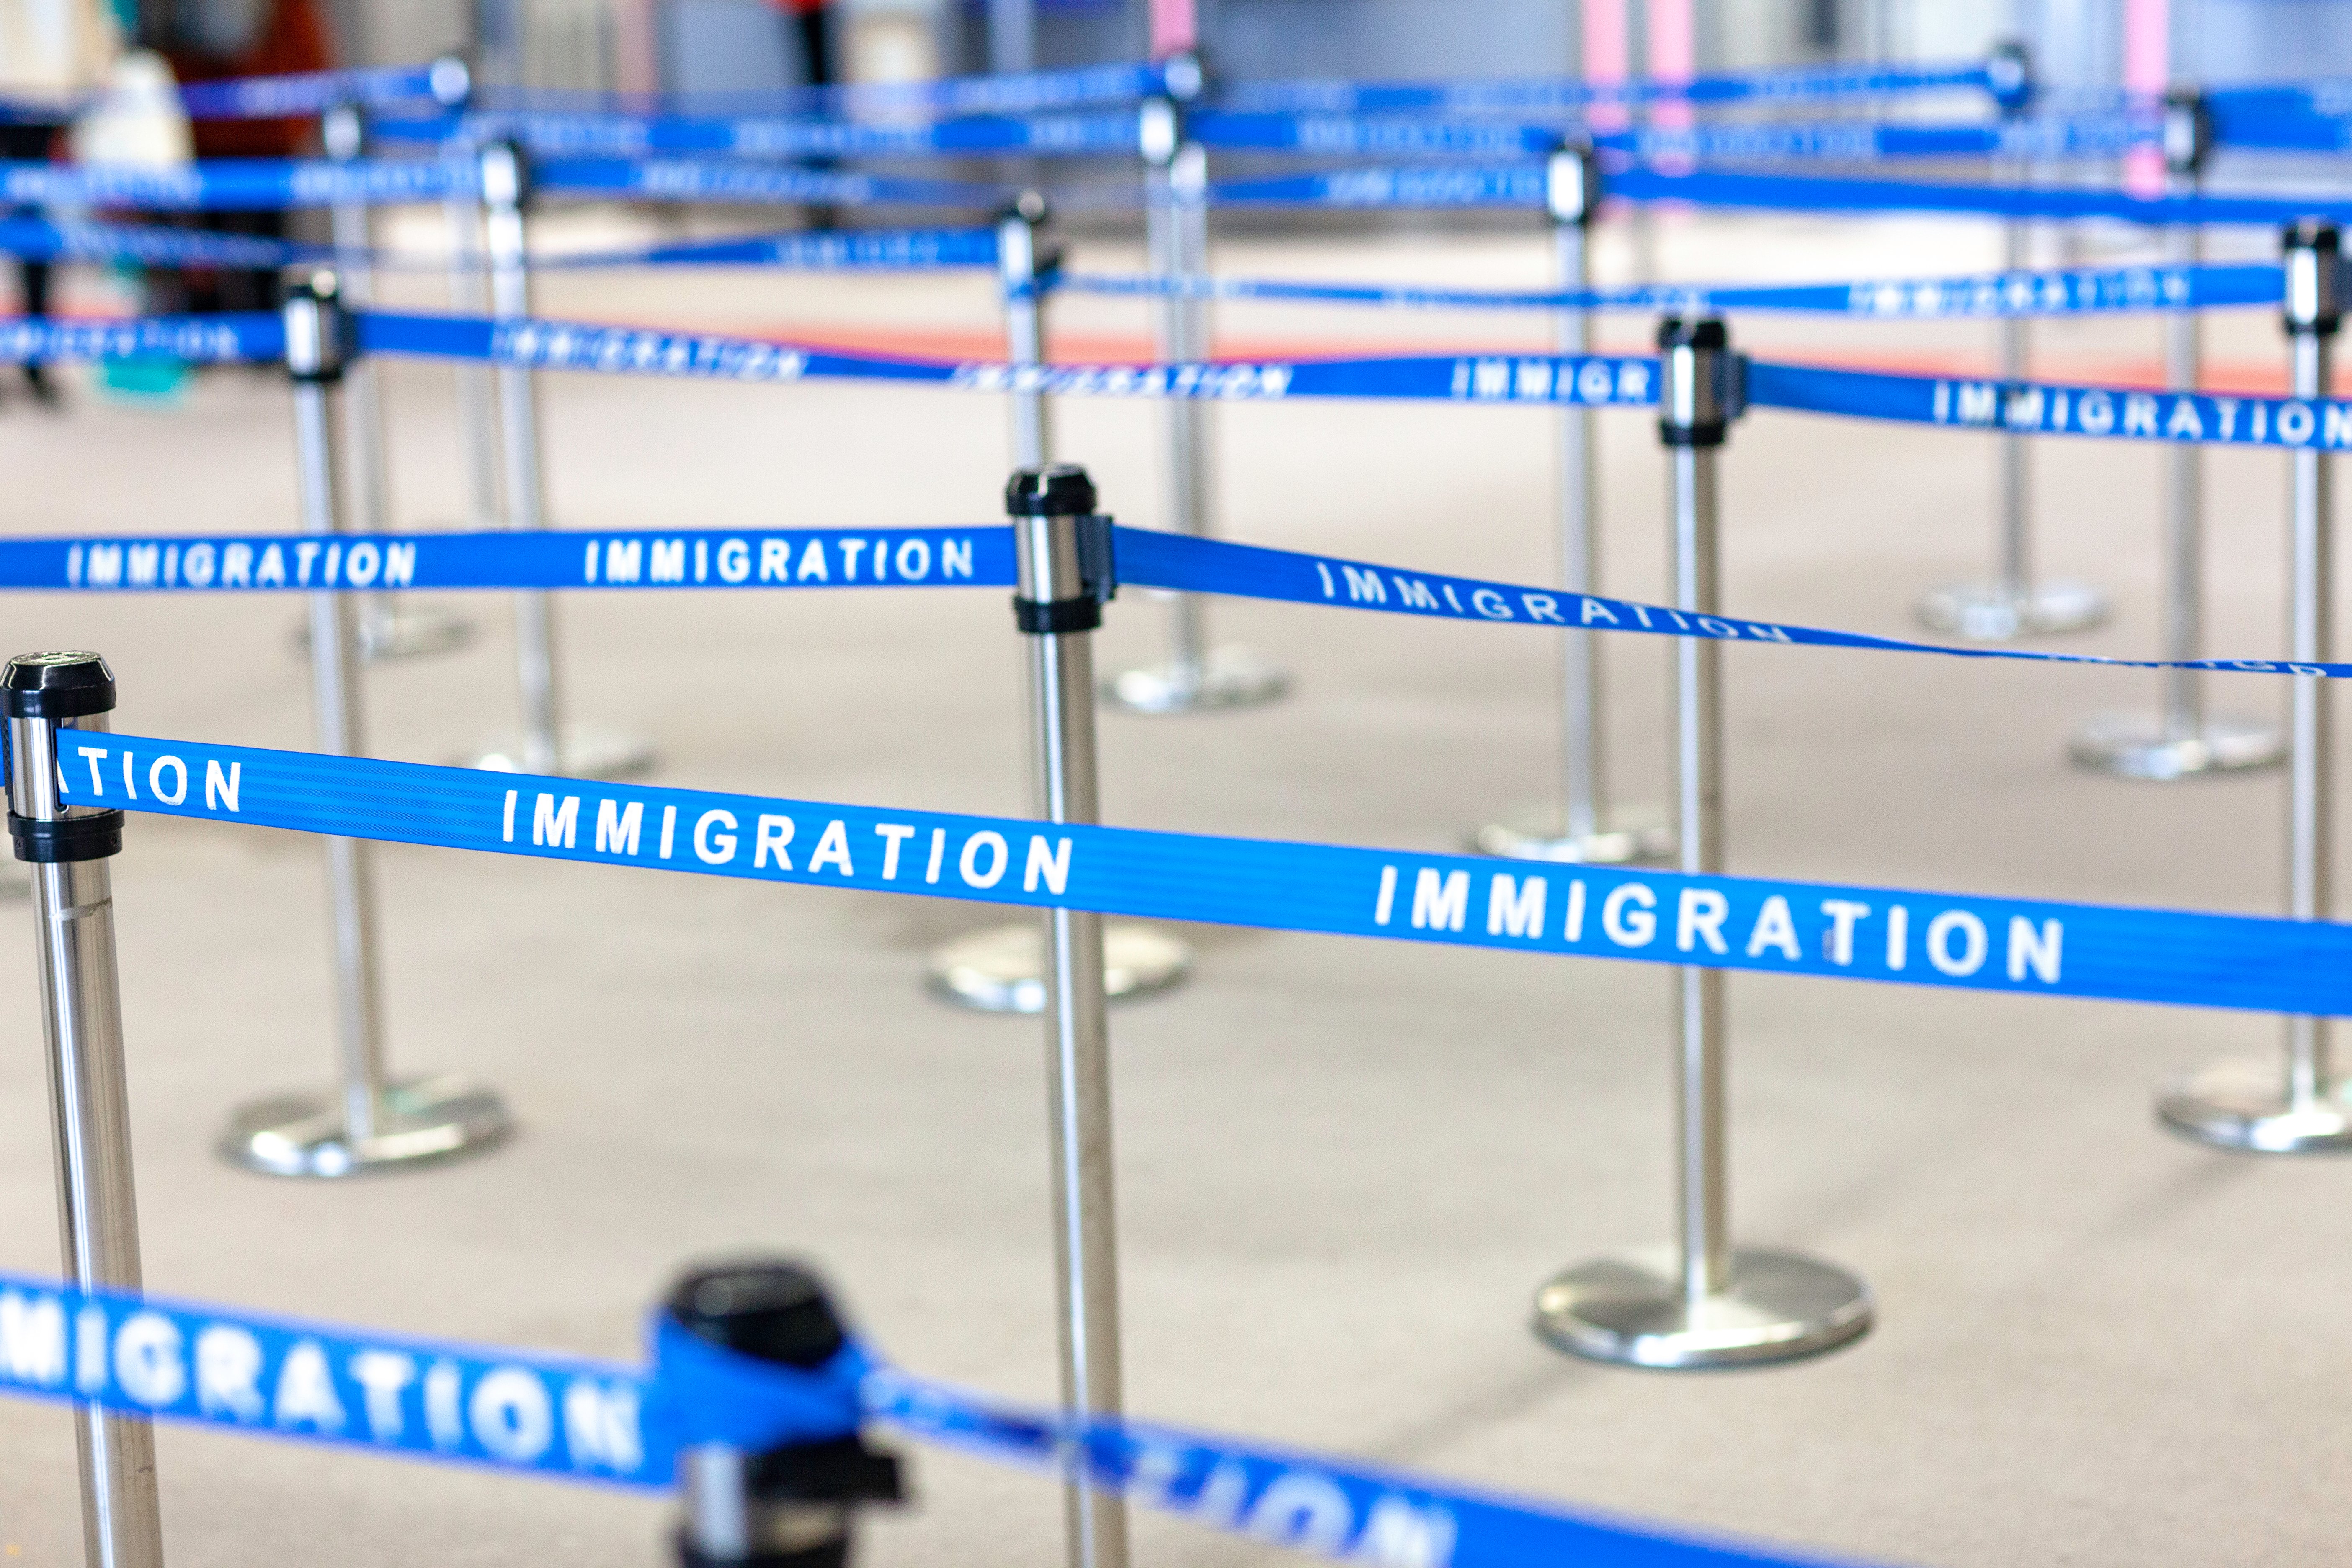 An immigration board line